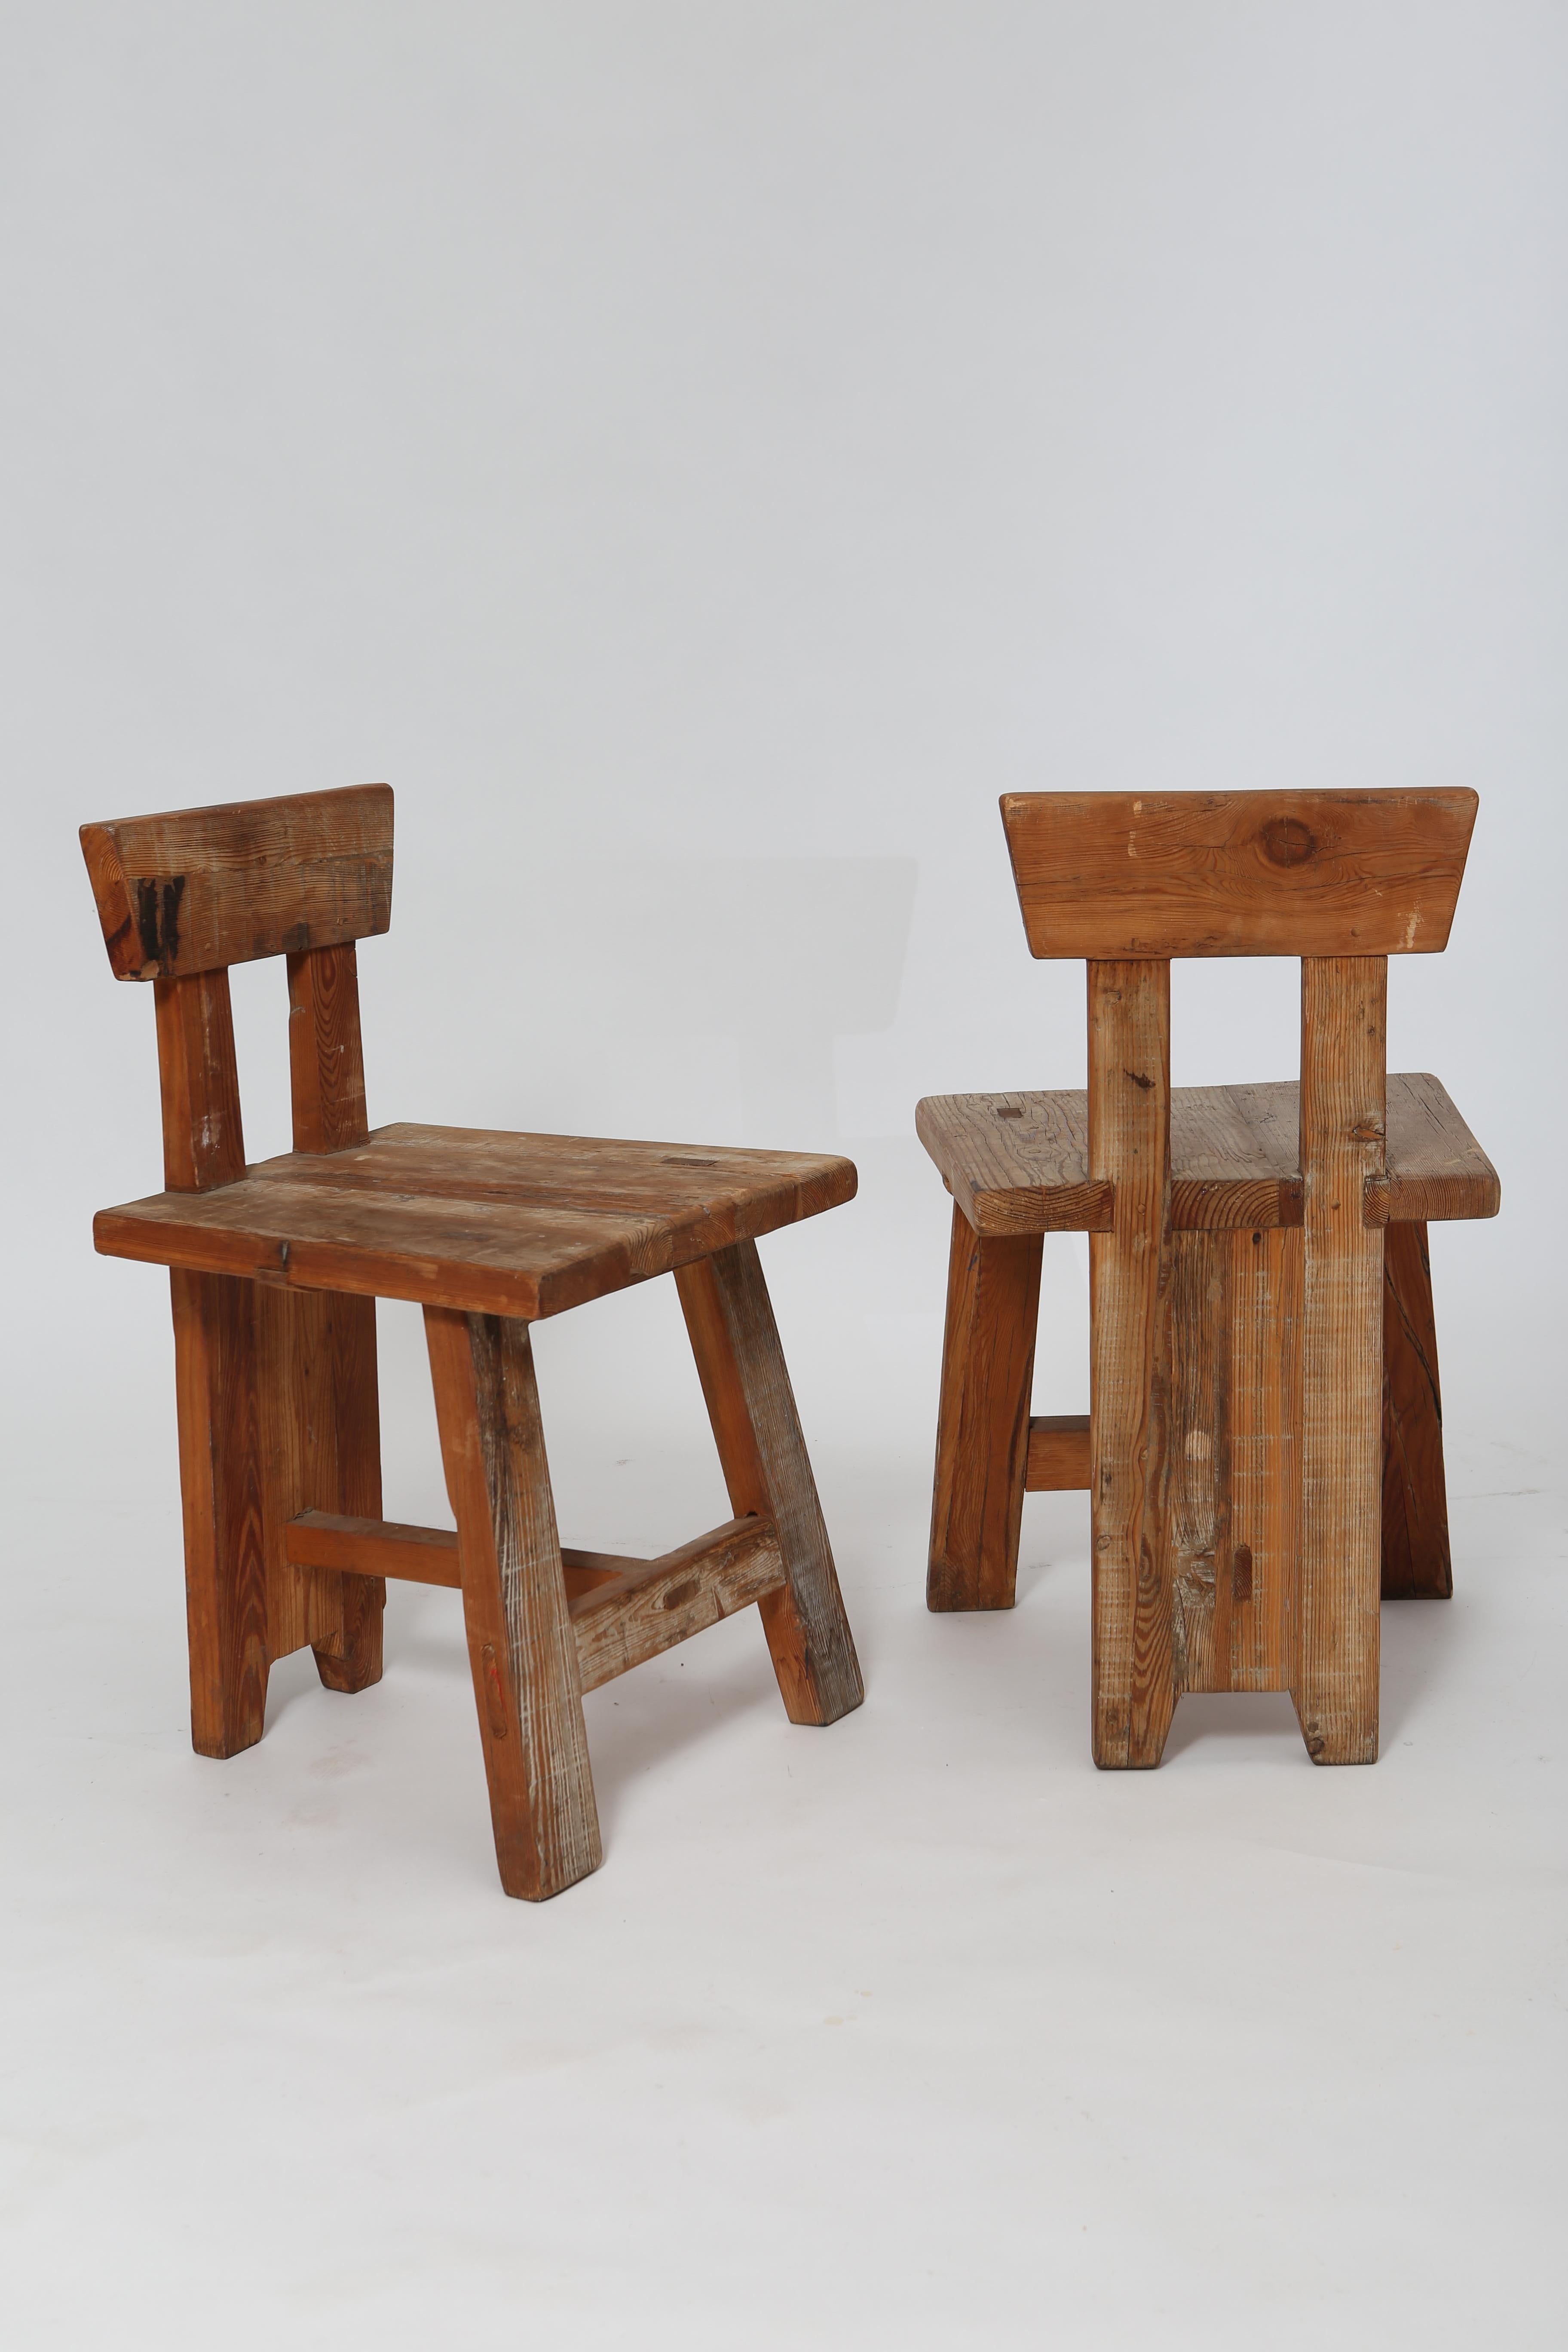 Chinese Modernist Pine Chairs, a Pair